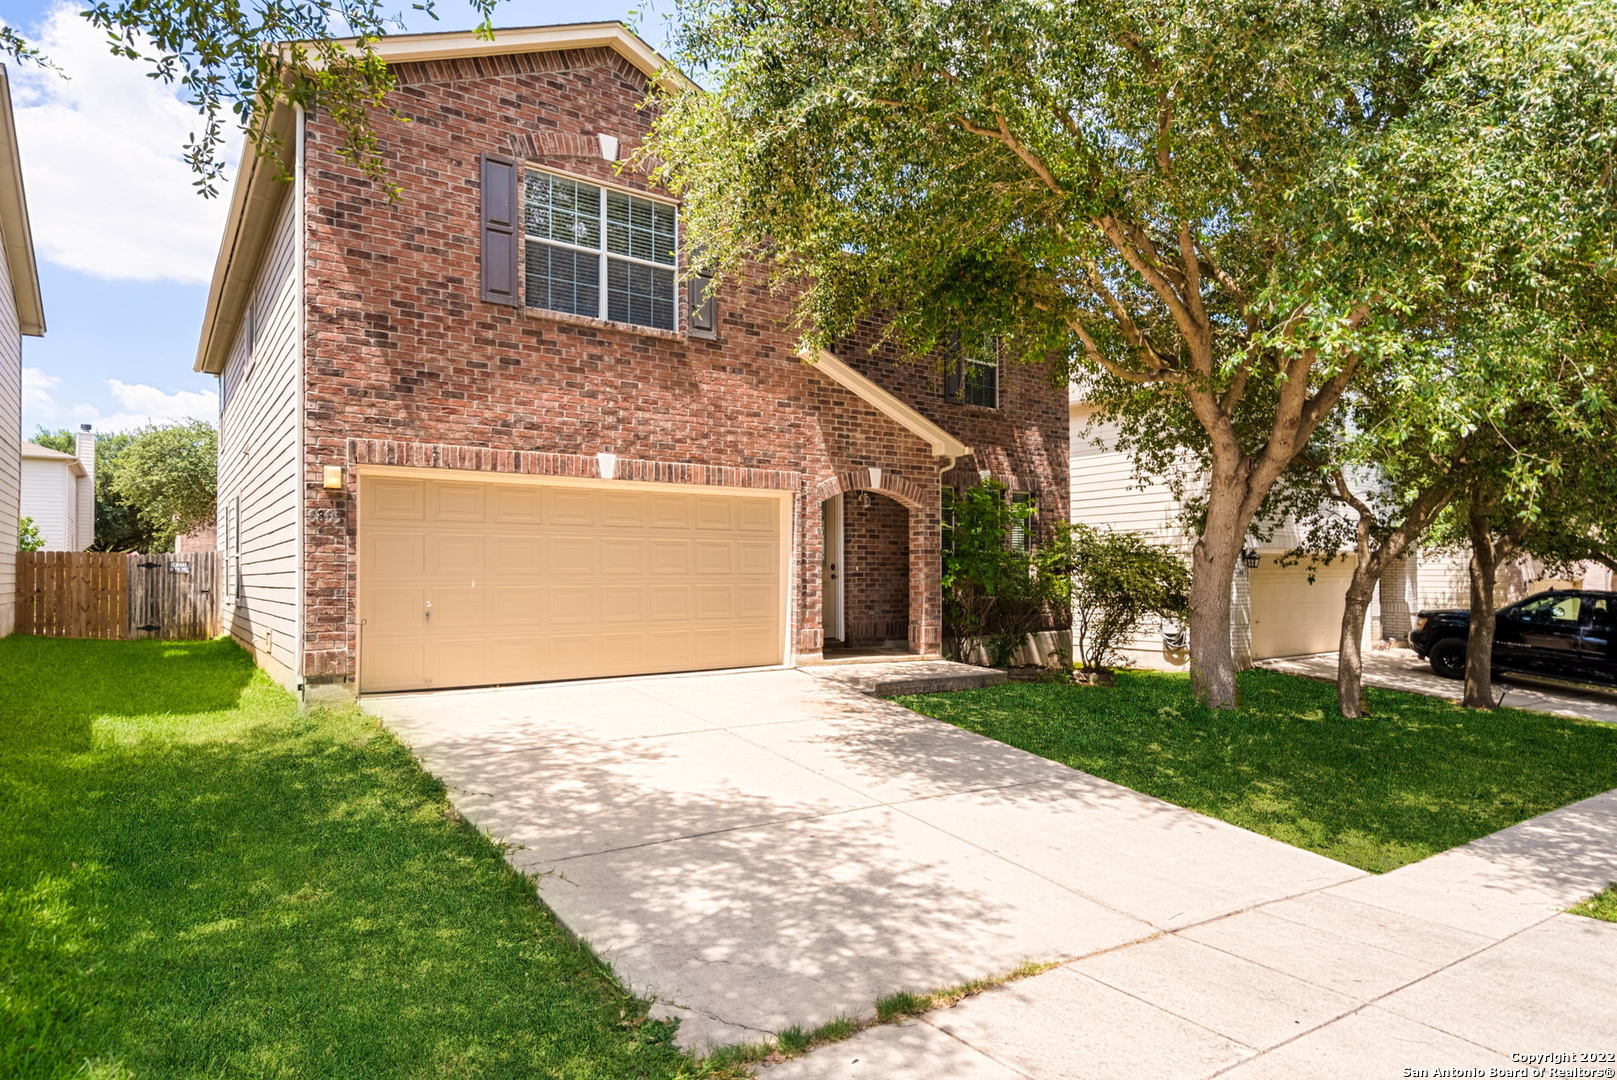 Great size of 3194 SQFT 4 BEDS AND 2 1/2 BATH home in a great location!  It only takes 7 minutes to 1604/I-35, 8 minutes to 410. The sam's club is only 2 miles away. Easy to commute everywhere. The refrigerator conveys, fully grown pear tree in the backyard.